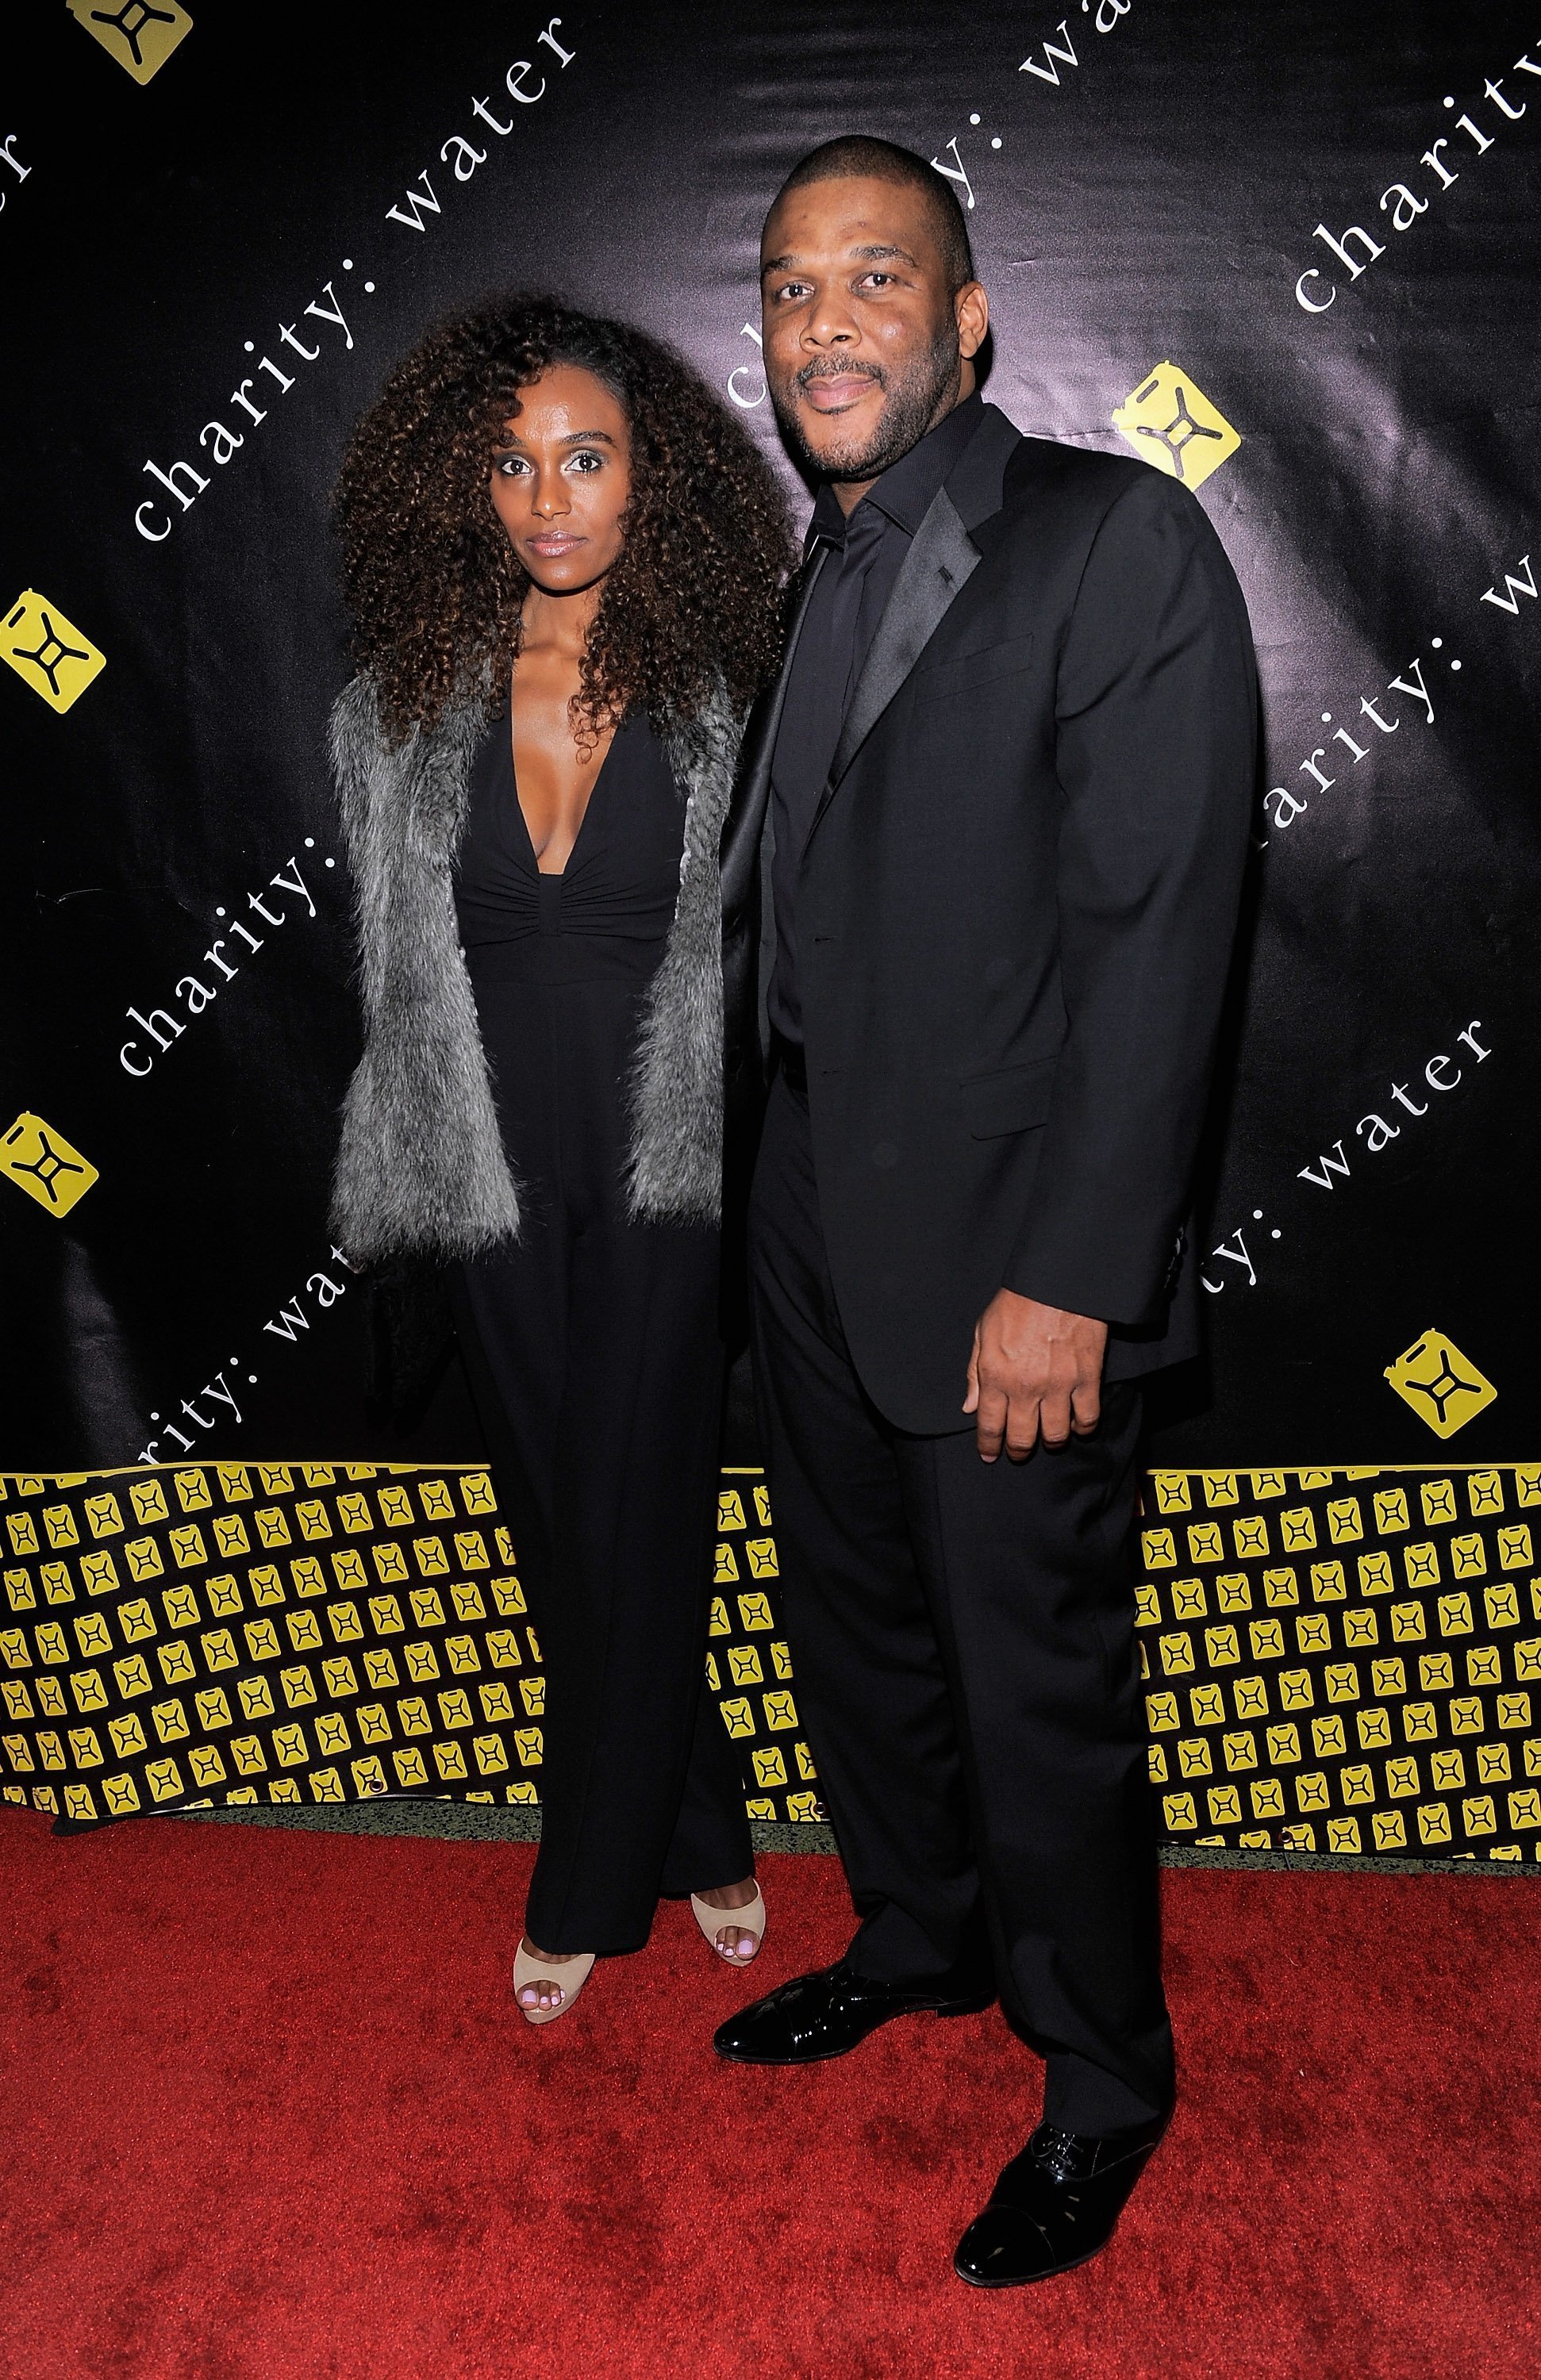 Tyler Perry and his long-time love Gelila Bekele at the 6th Annual Charity Ball / Source: Getty Images